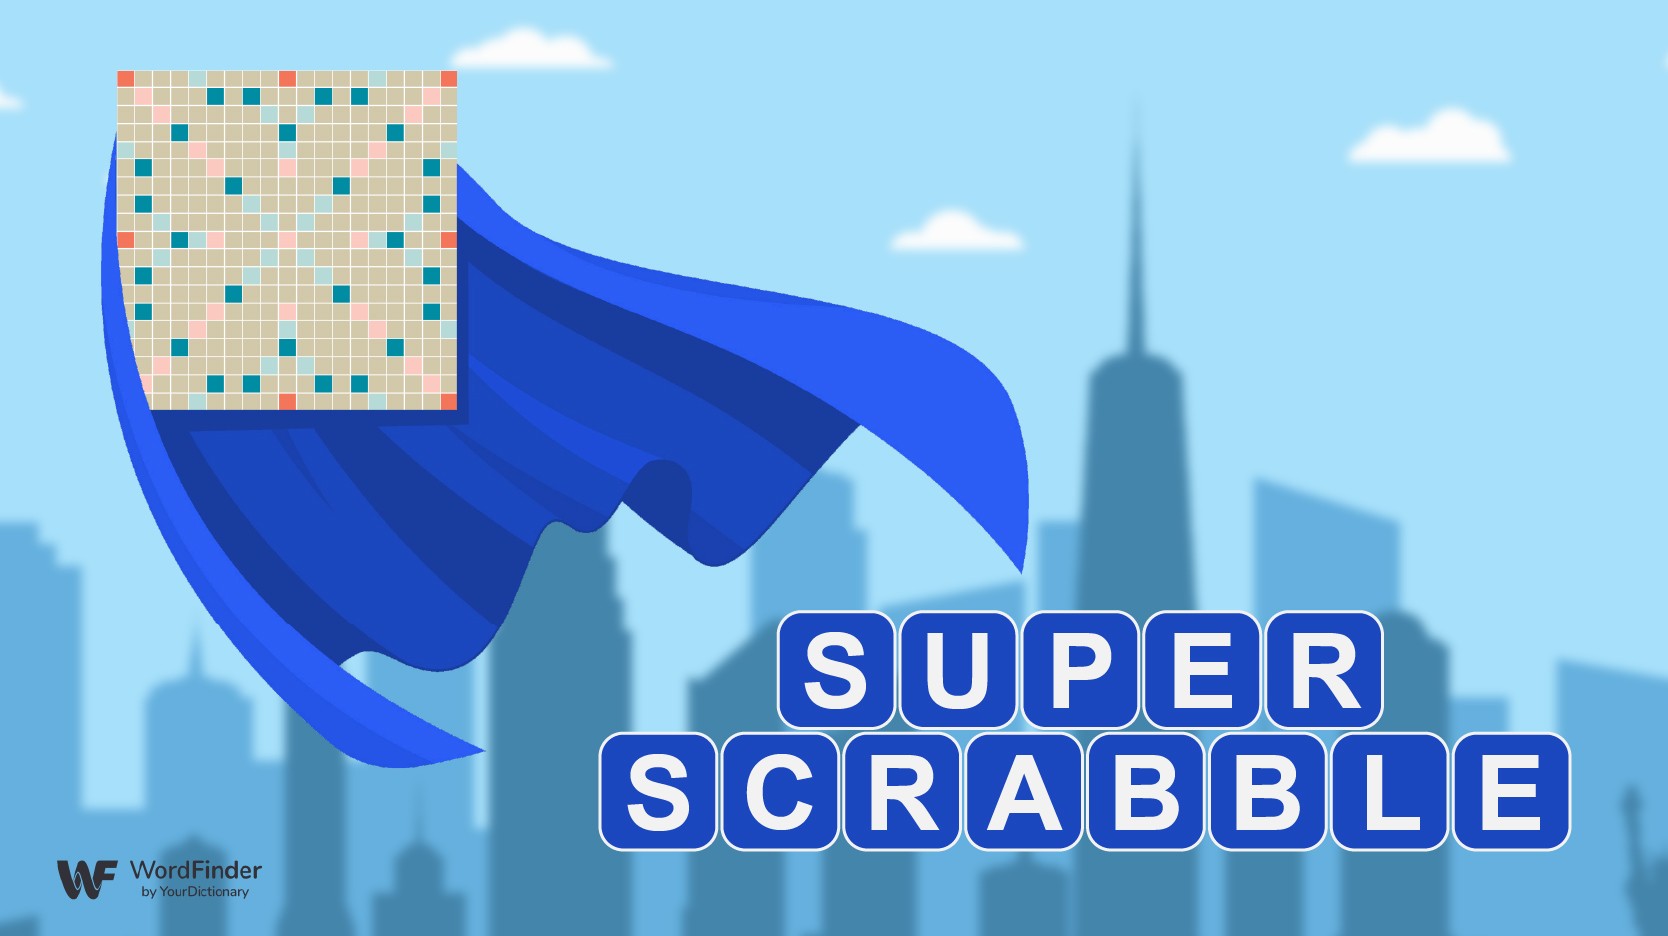 super scrabble board with cape and city background